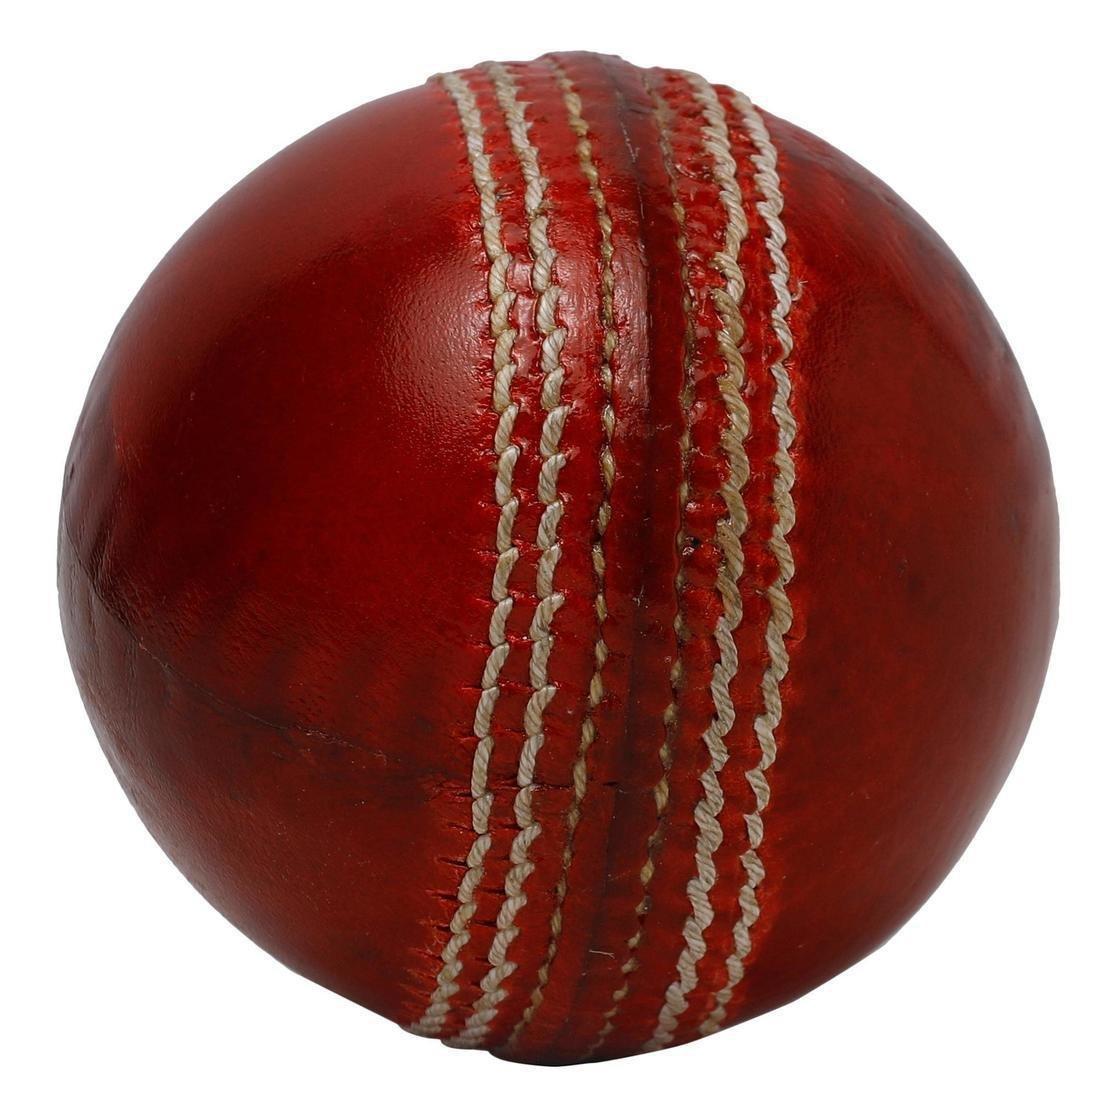 FLX - Non Toxic 4 Piece Cricket Leather Ball, Maroon